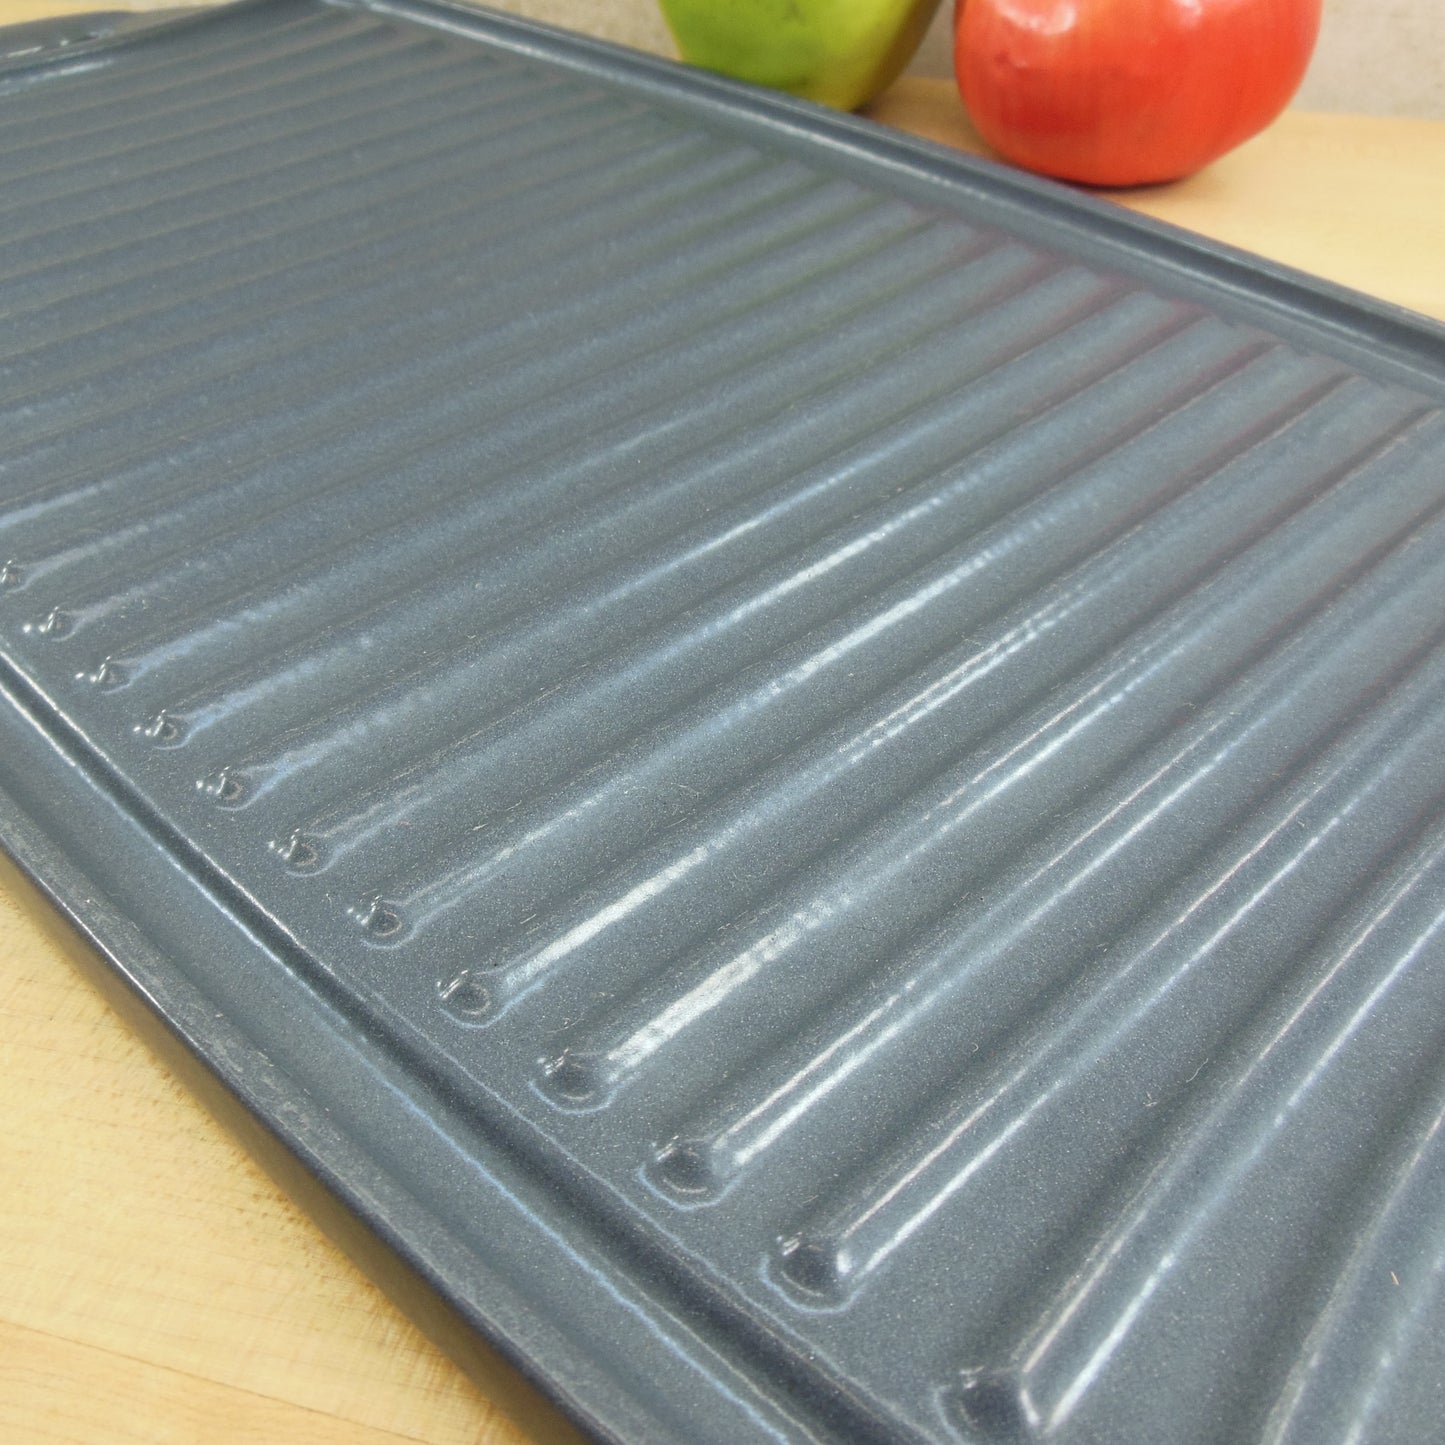 LaFont Jumbo Gray Enamel Cast Iron Griddle Grill Double Used